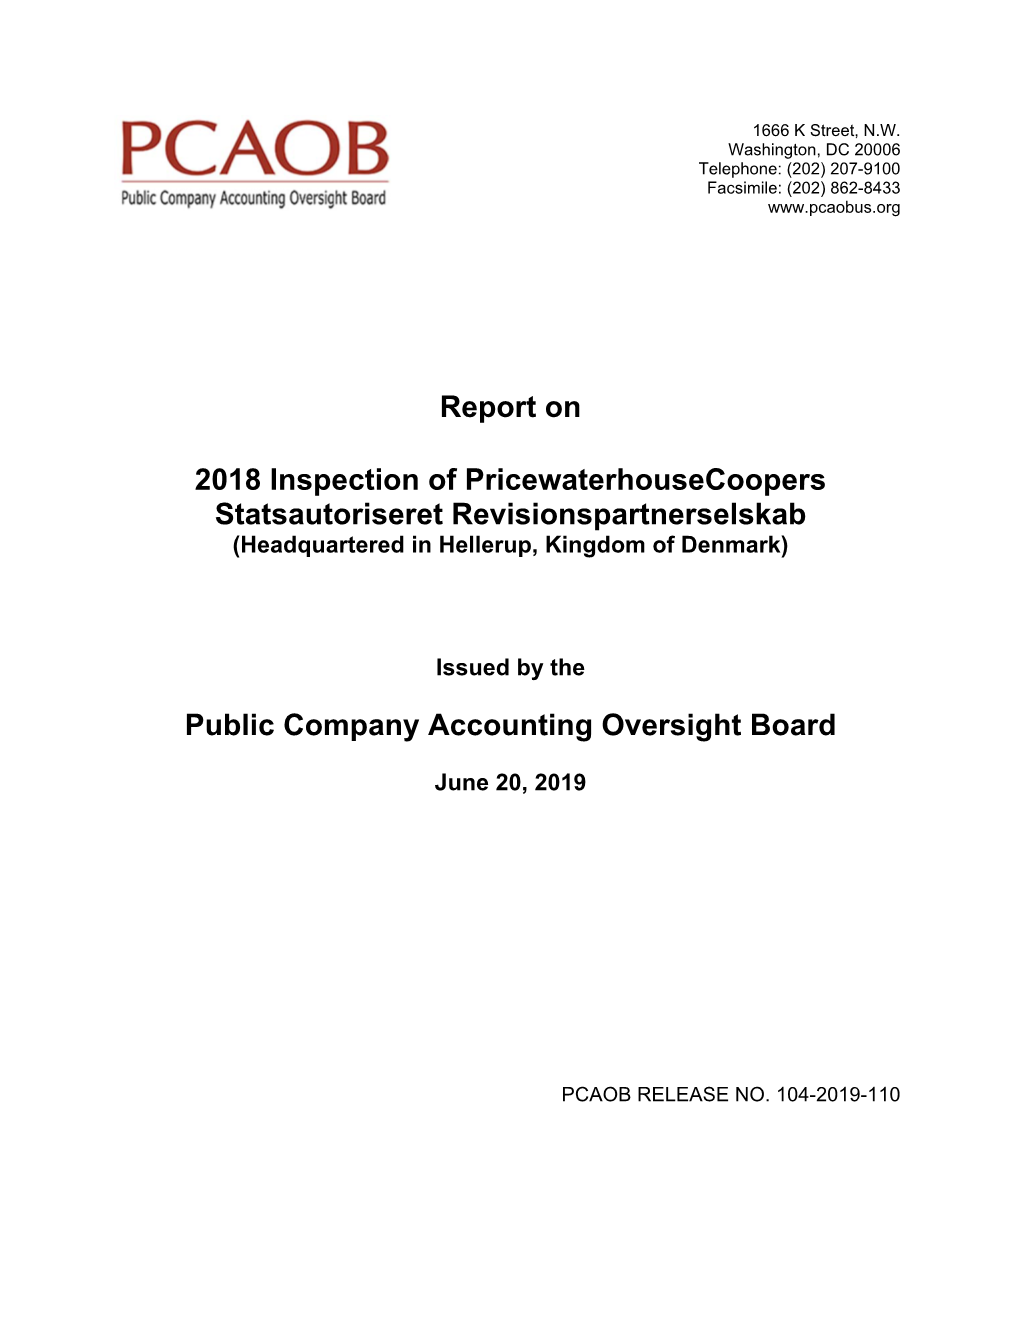 Report on 2018 Inspection of Pricewaterhousecoopers